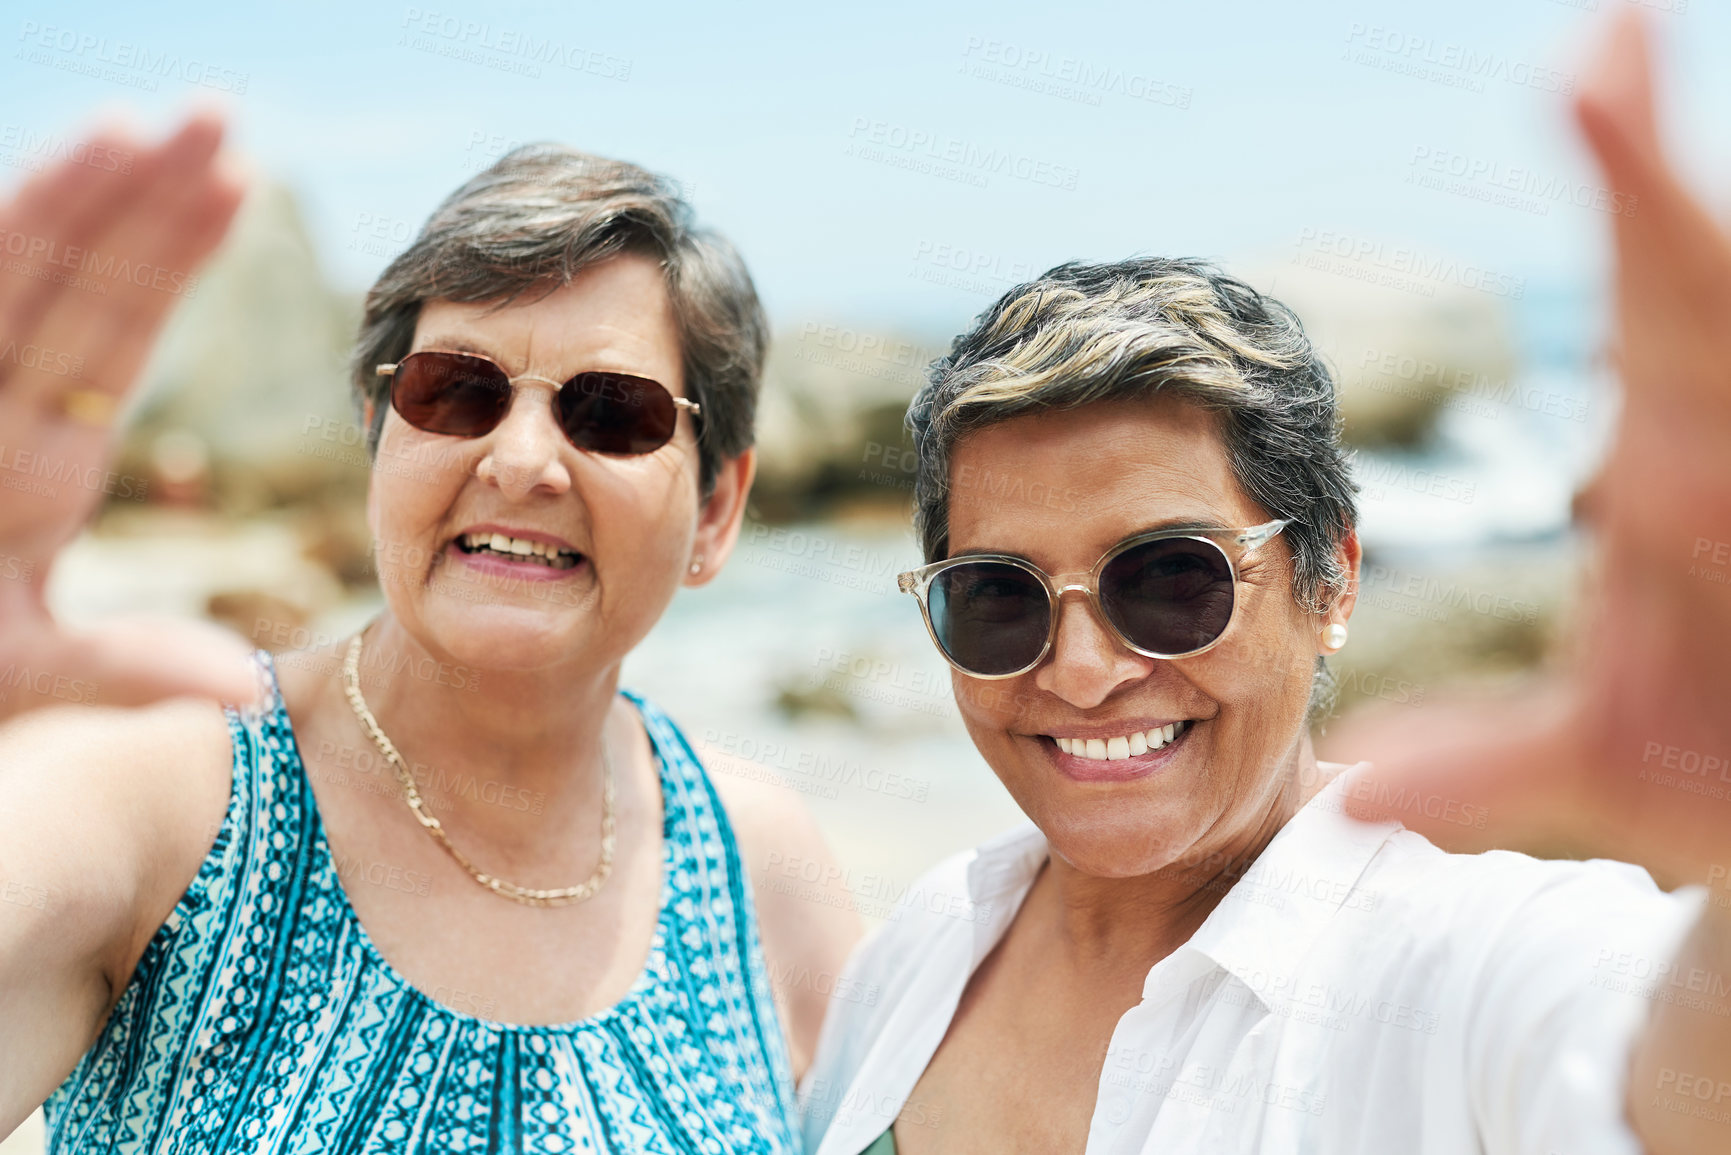 Buy stock photo Shot of two mature friends standing together and posing for a selfie during a day out on the beach